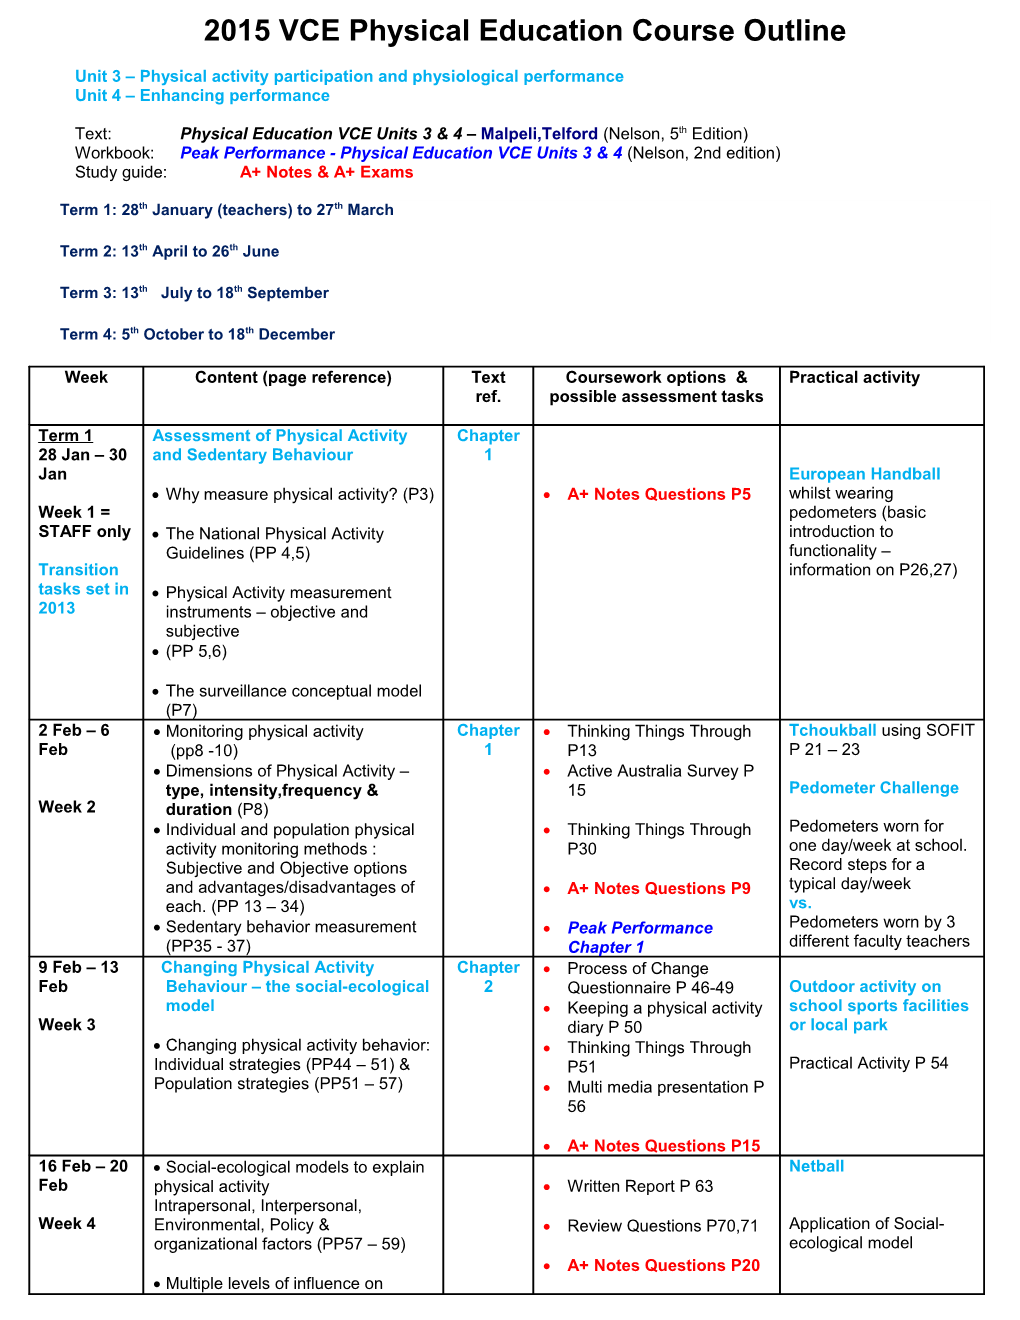 2015 VCE Physical Education Course Outline